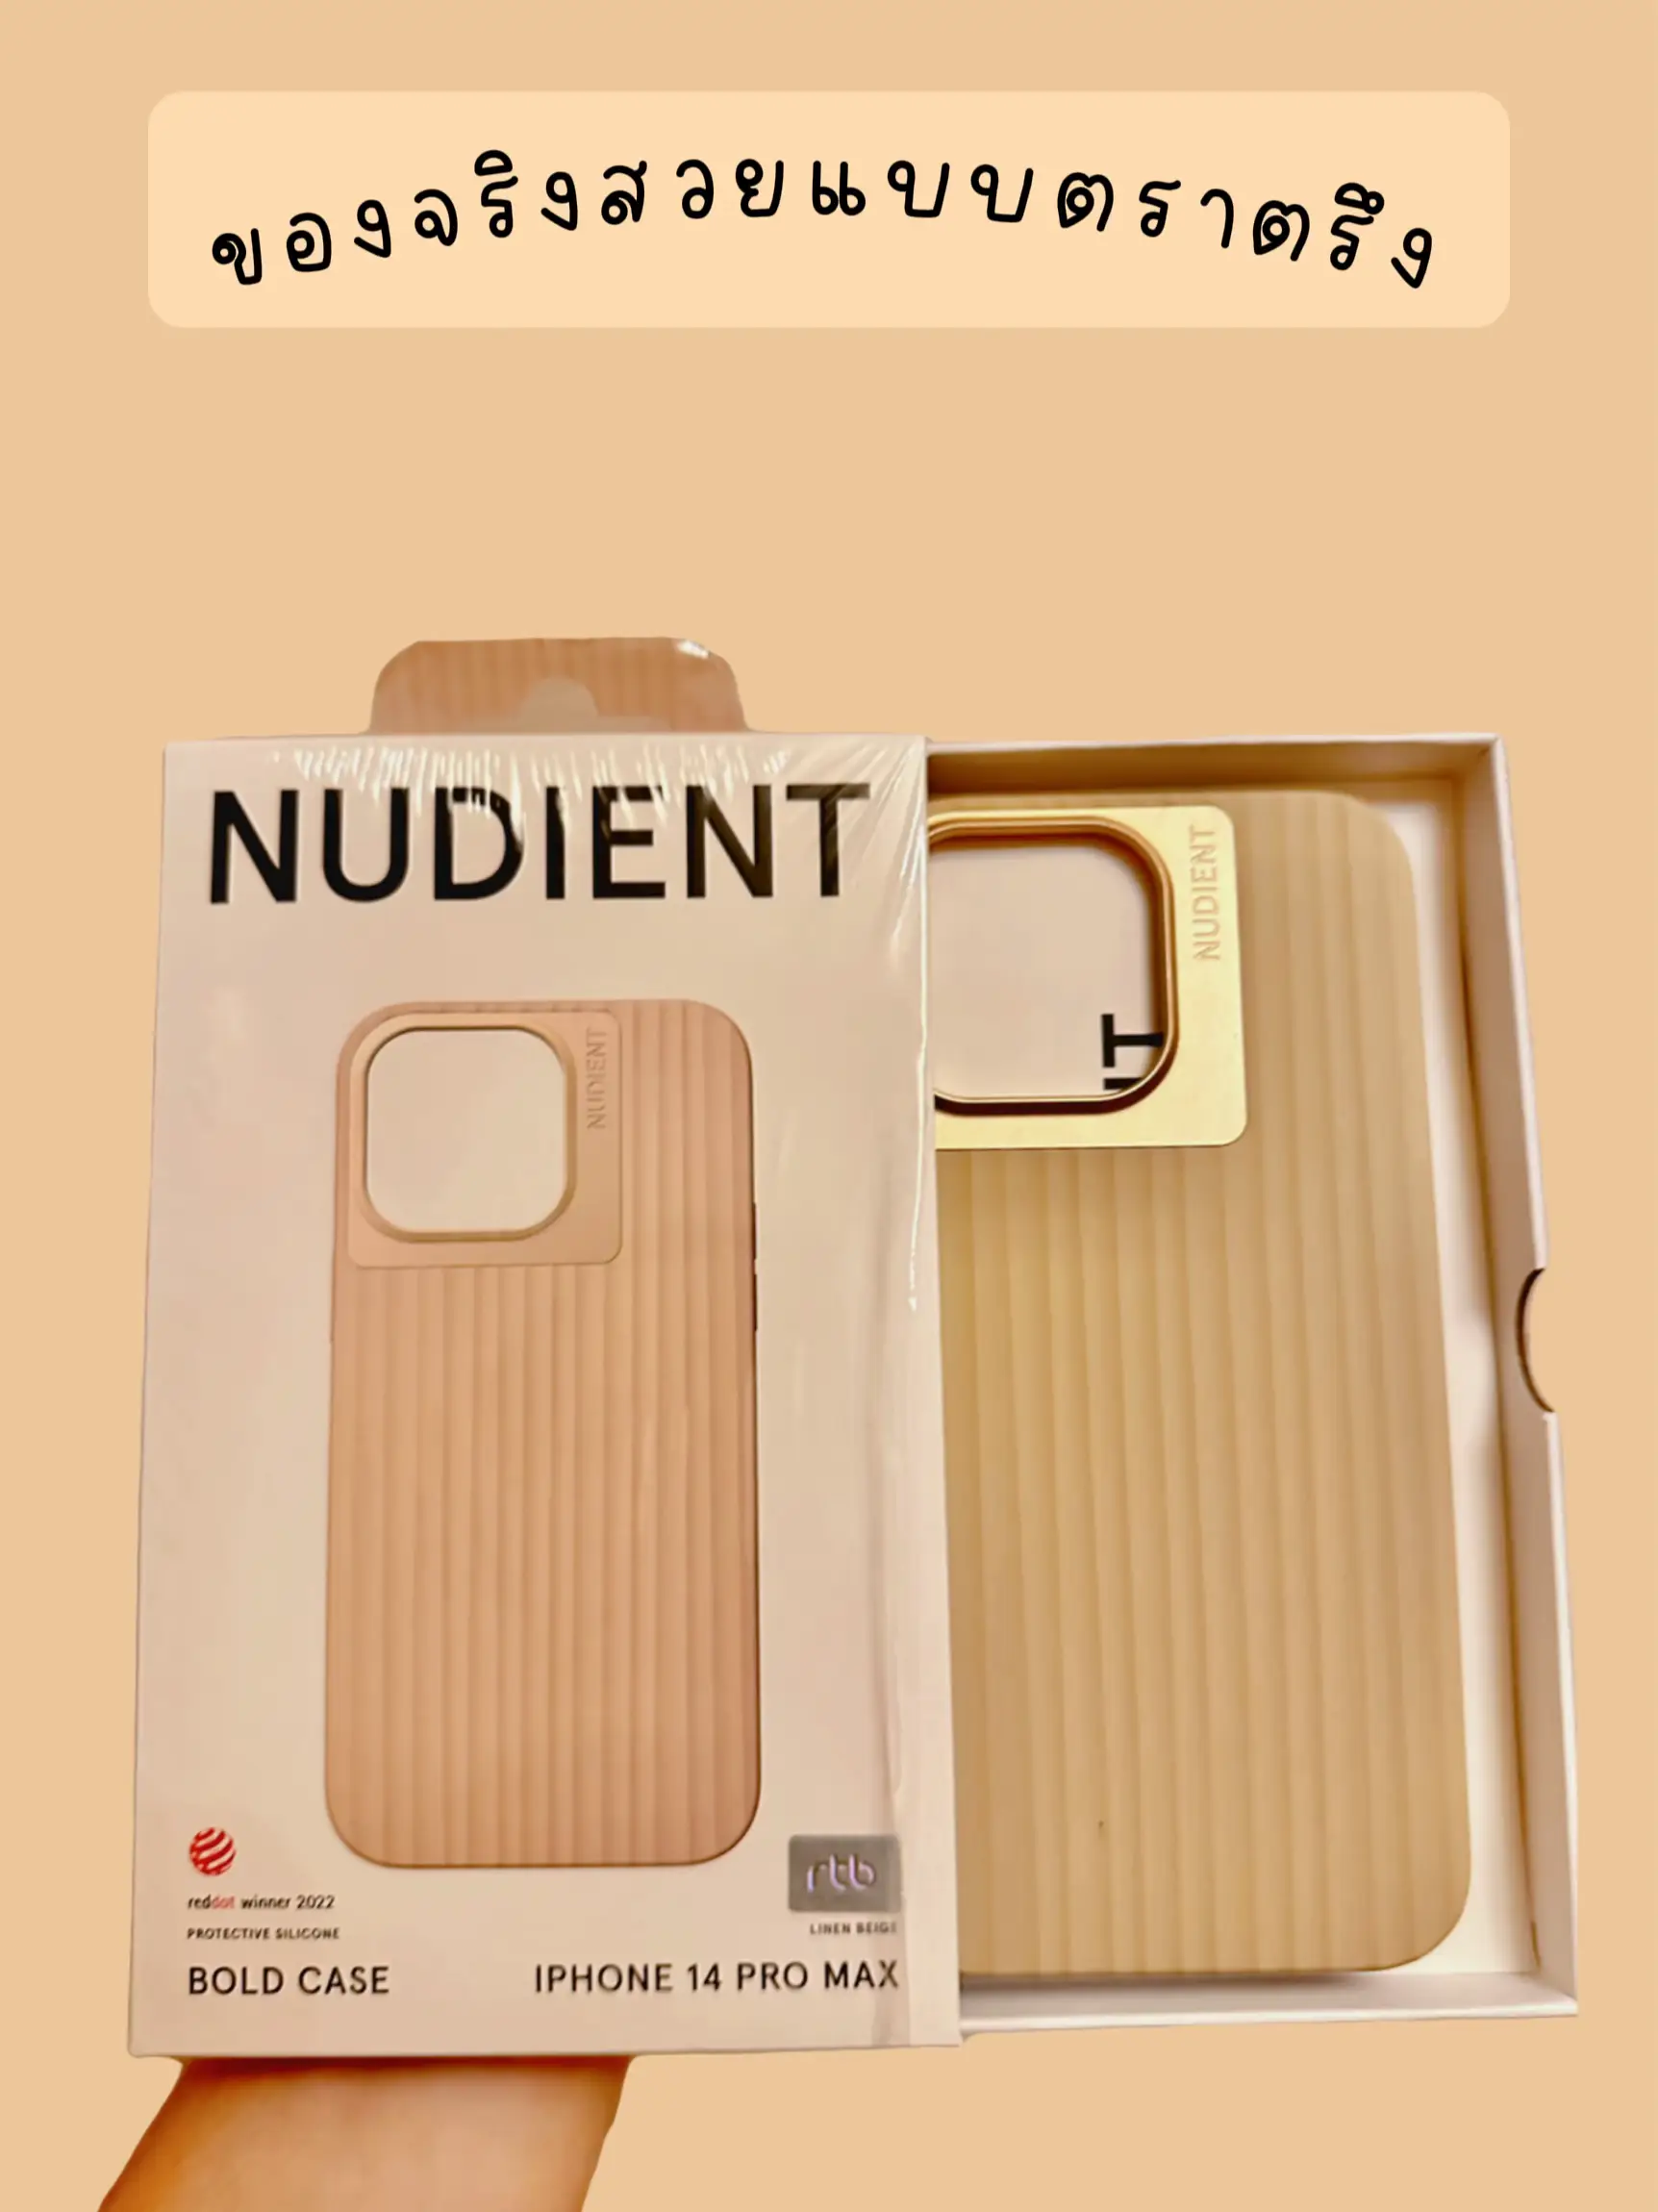 Nudient iPhone 14 Pro cases, iPhone 14 Pro covers